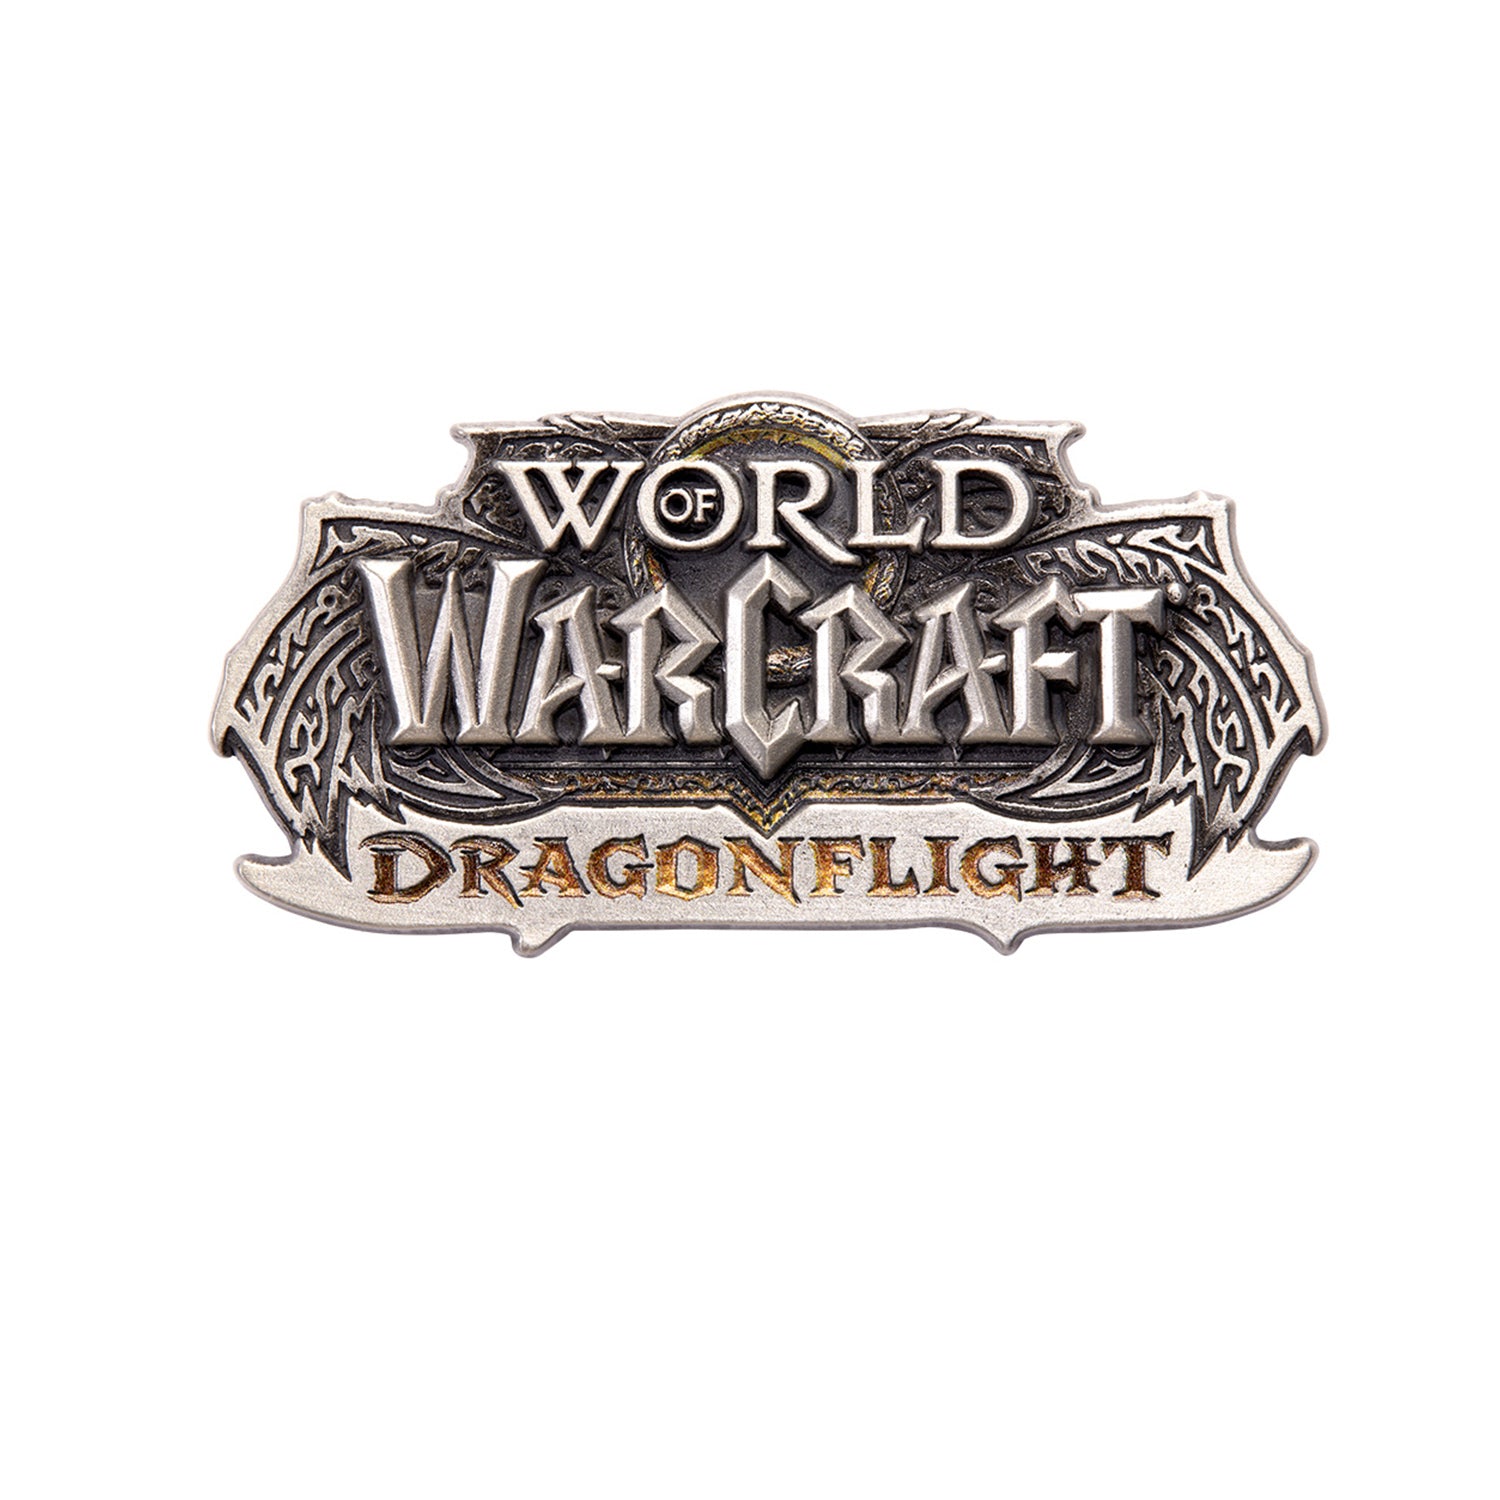 World of Warcraft Dragonflight Logo Collector's Edition Pin - Close Up View